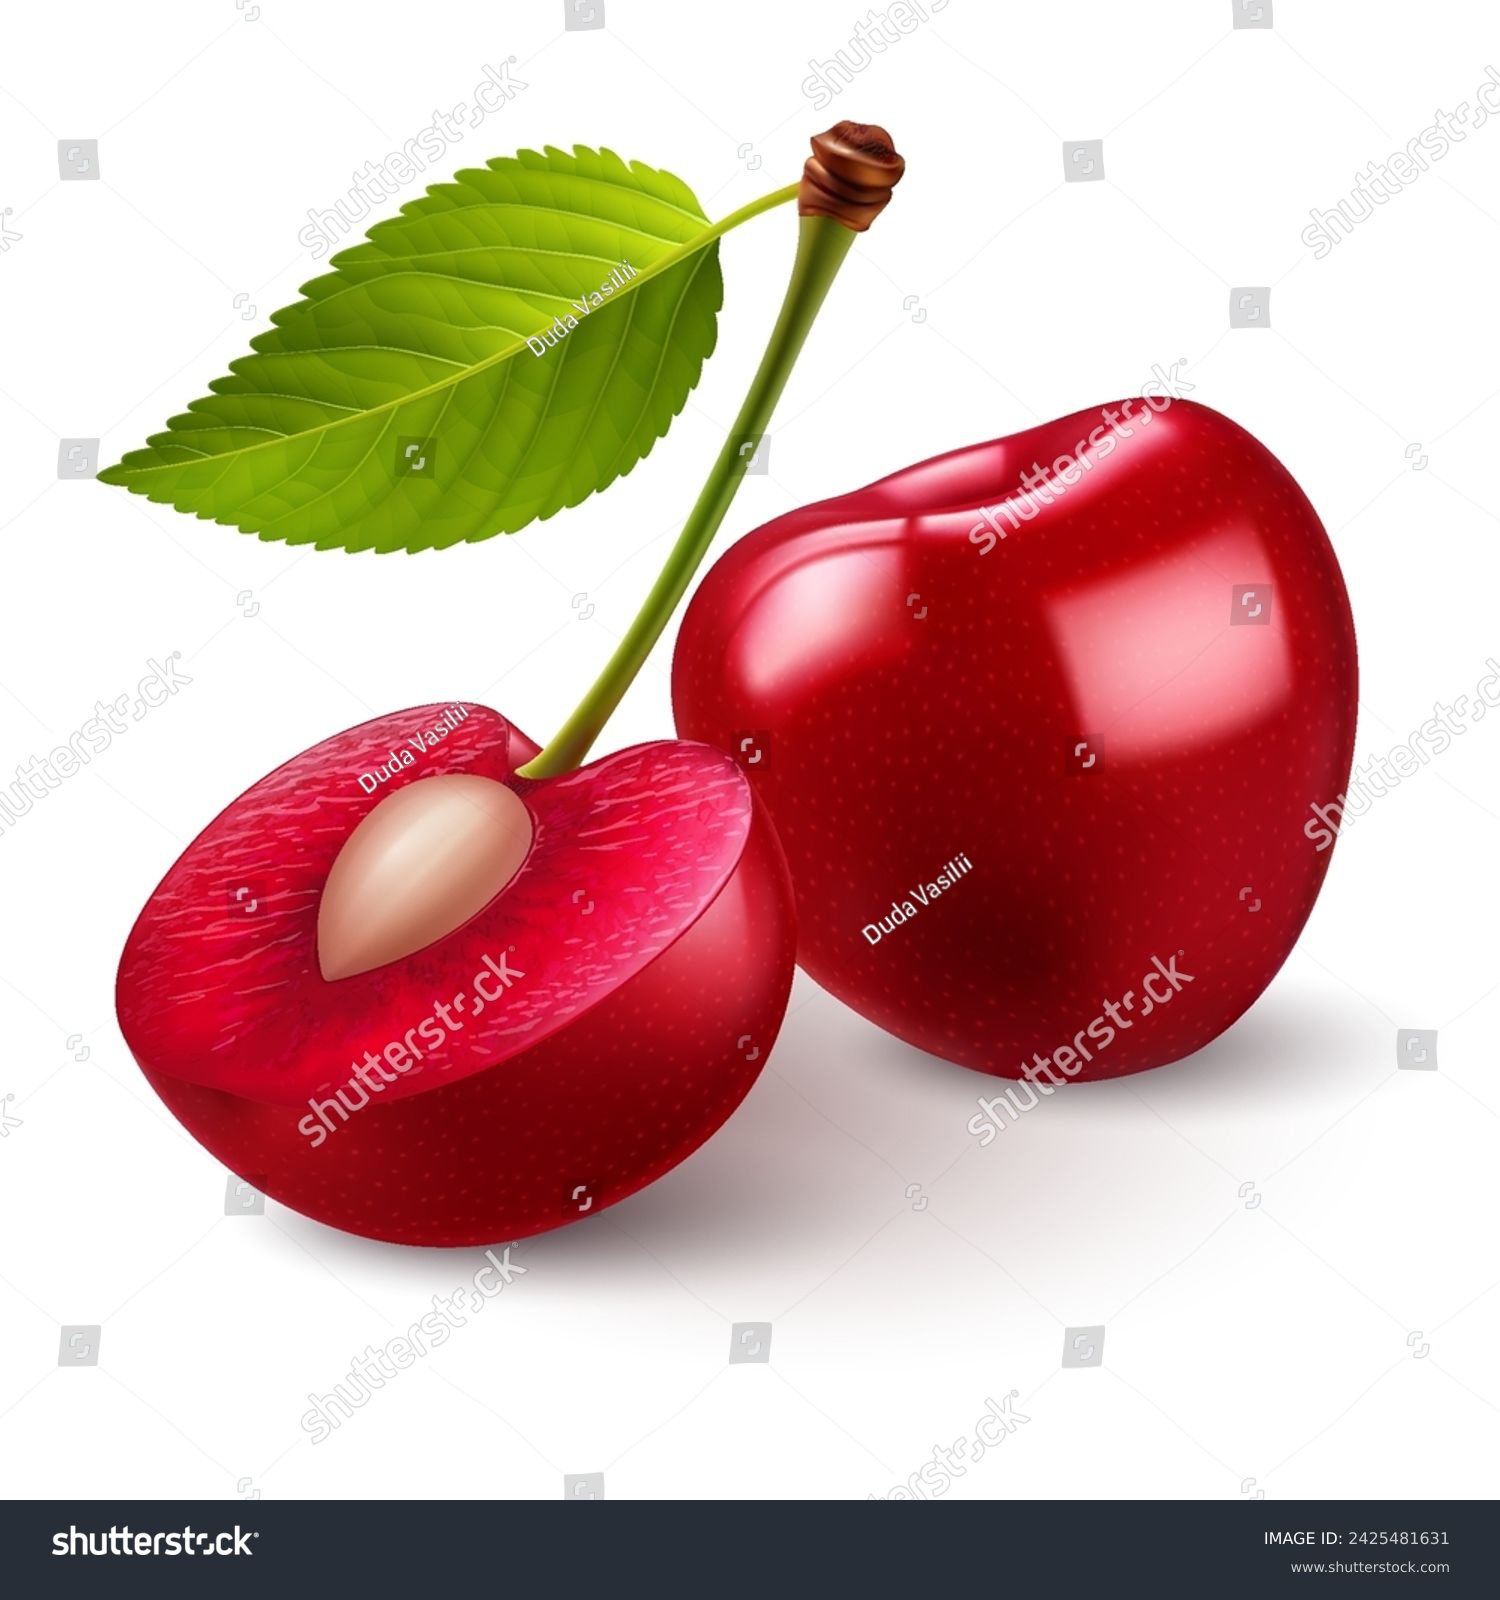 Ripe red sweet cherries with smooth skin, juicy light red flesh, and small pit #2425481631